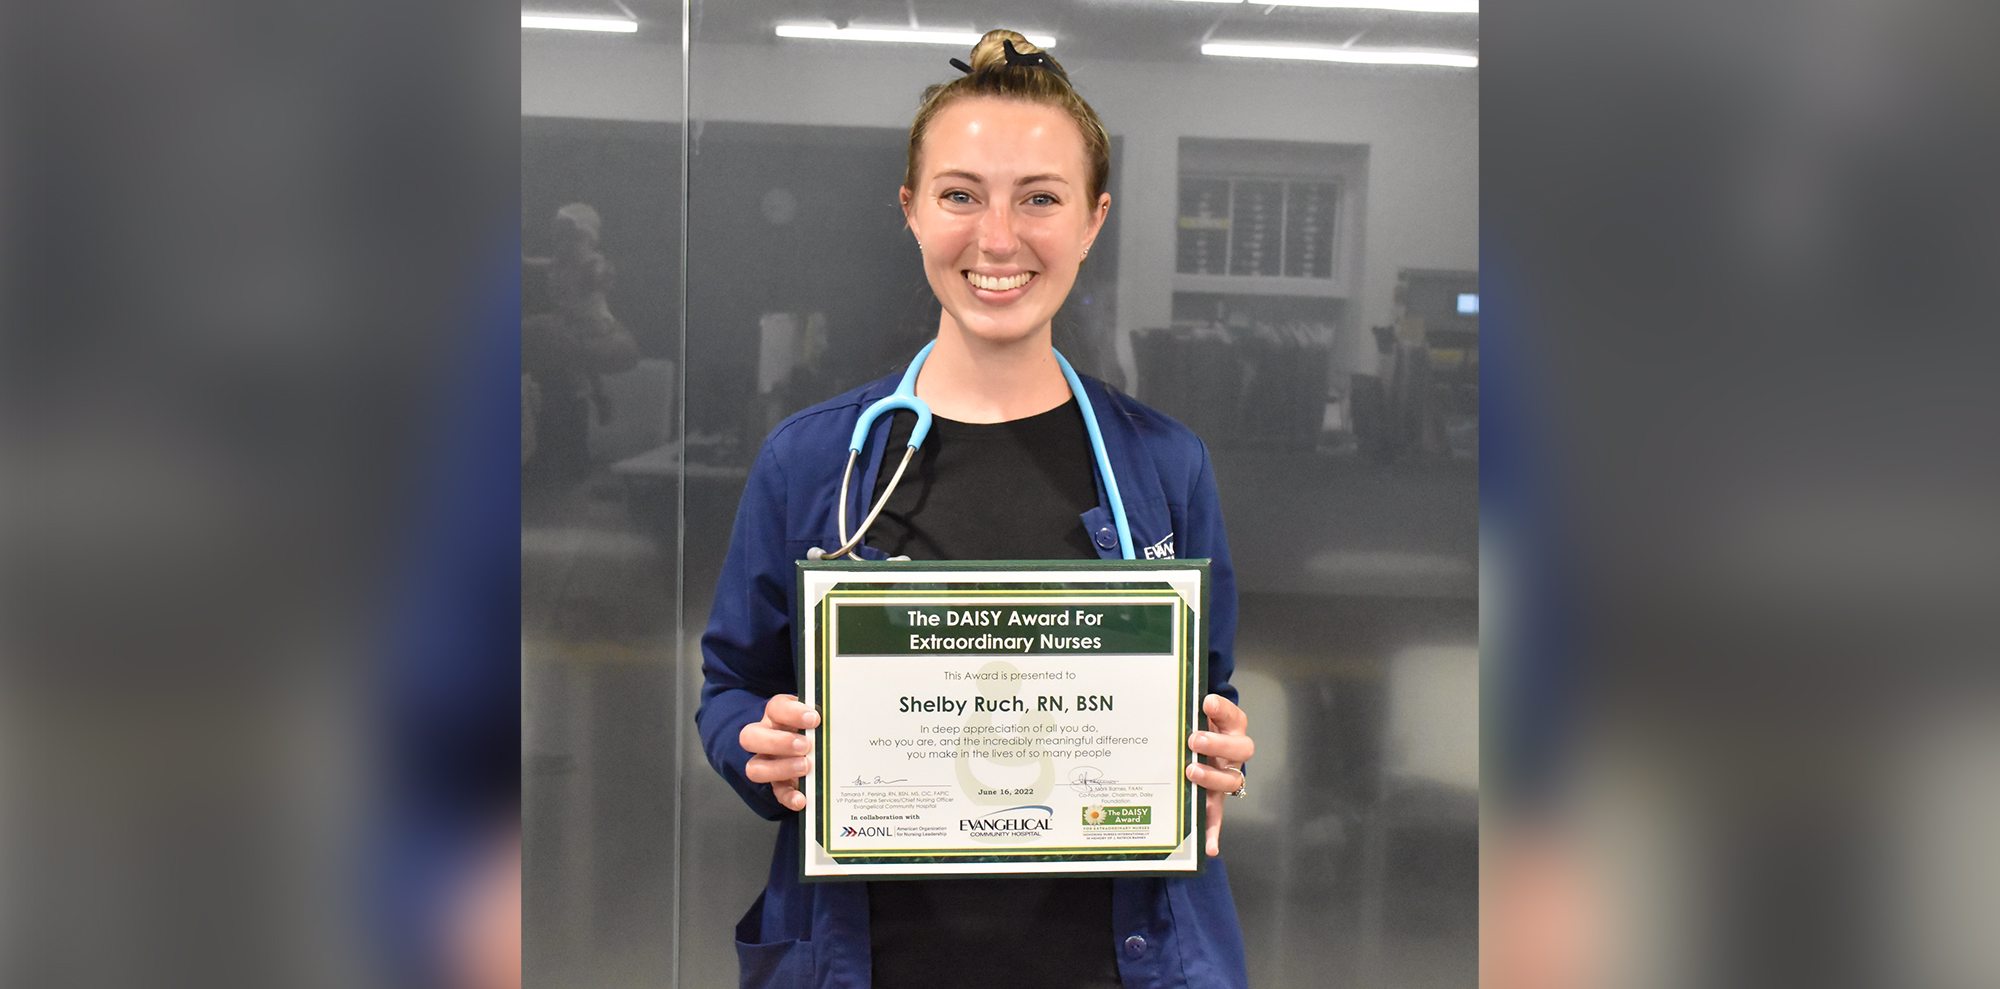 Evangelical Community Hospital Awards DAISY Honor for Nursing Excellence to Shelby Ruch, RN, BSN